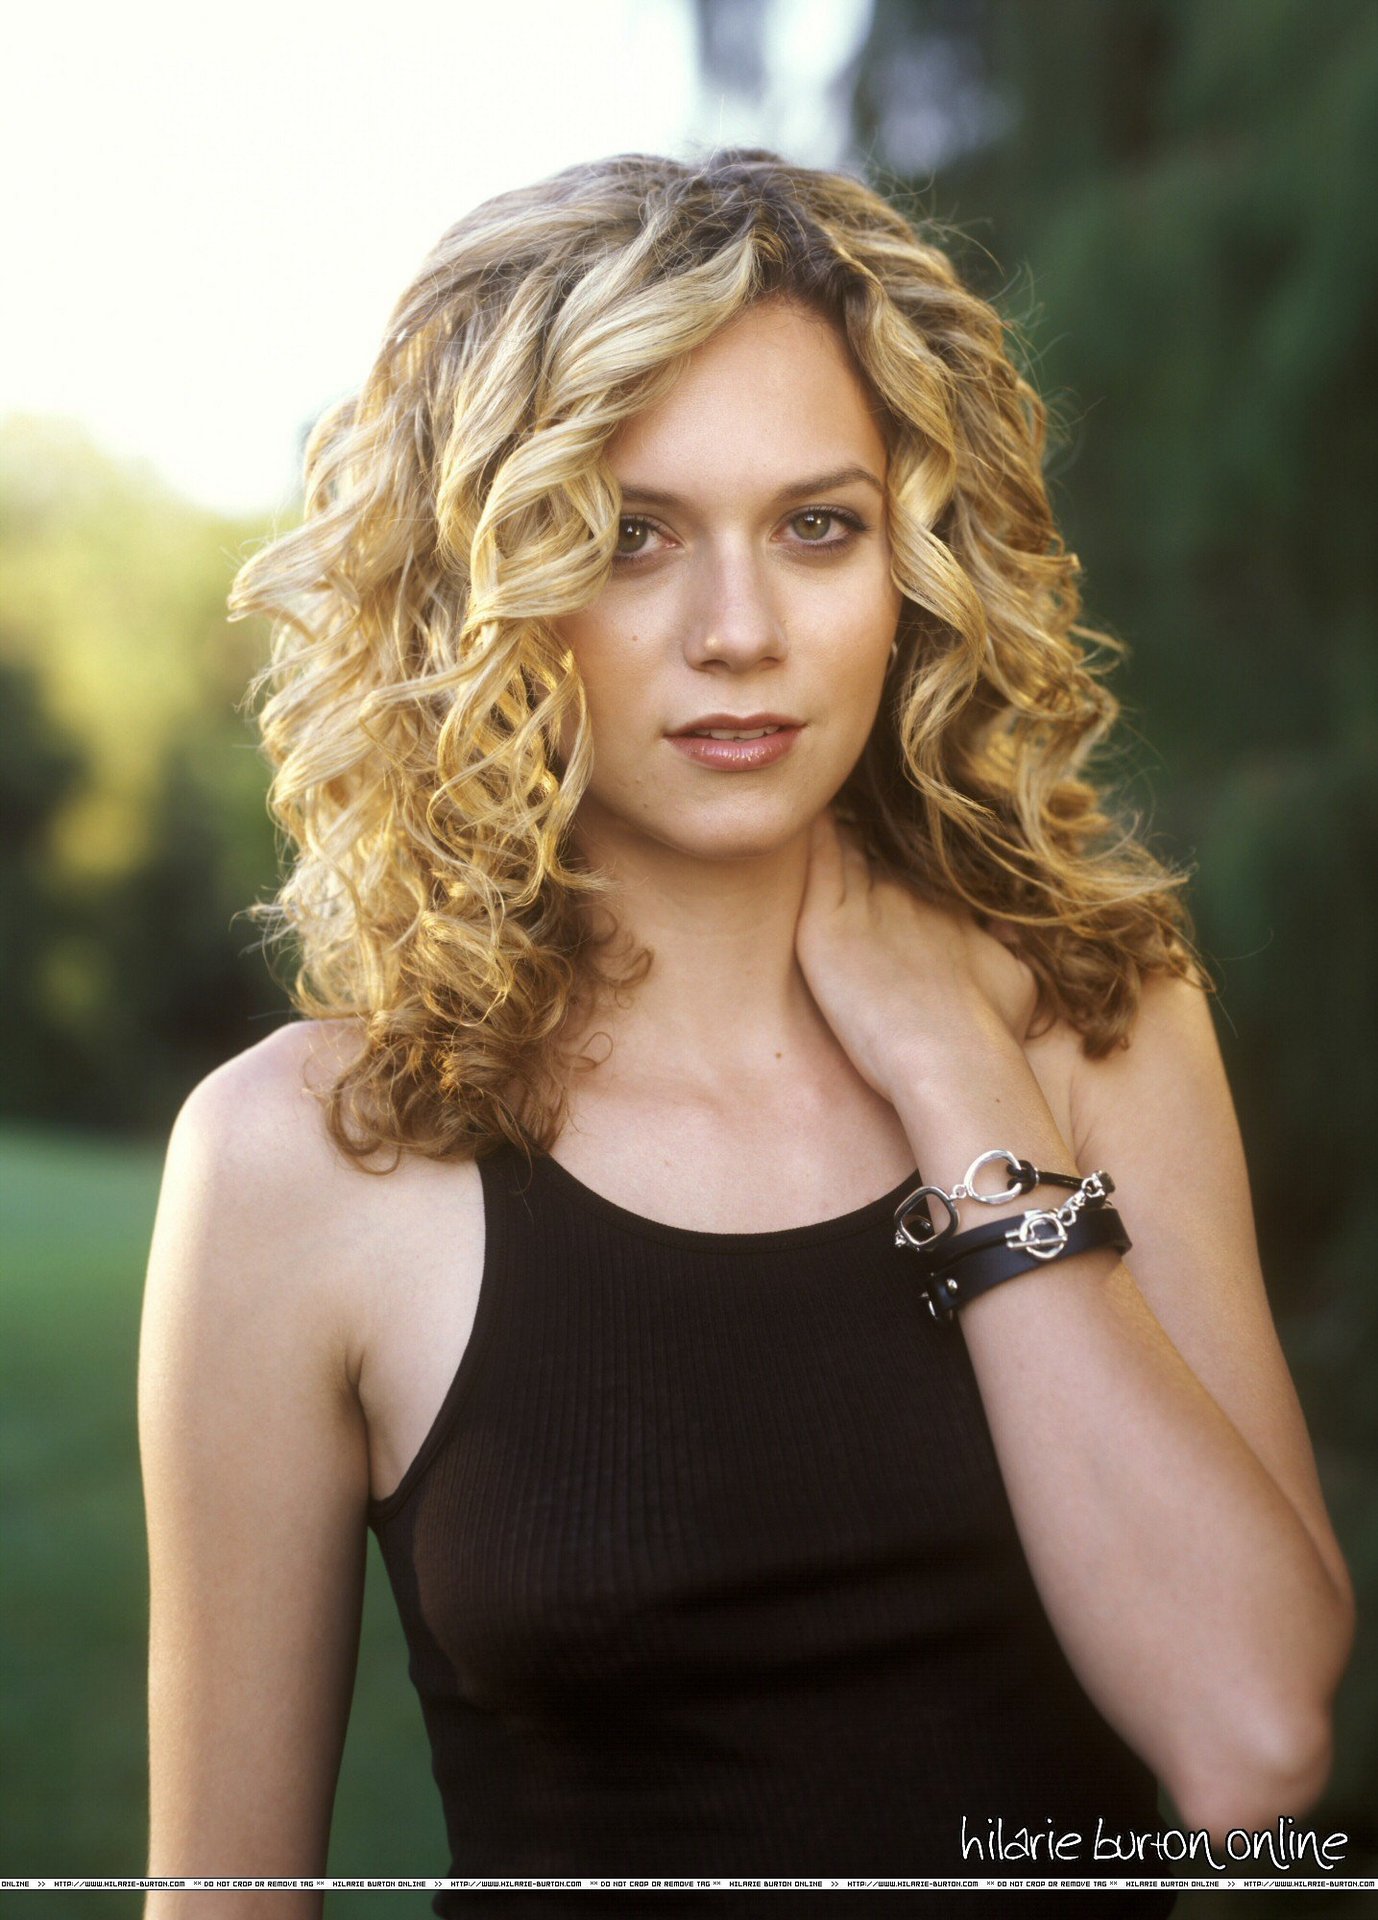 Hilarie Burton Image HD Wallpaper And Background